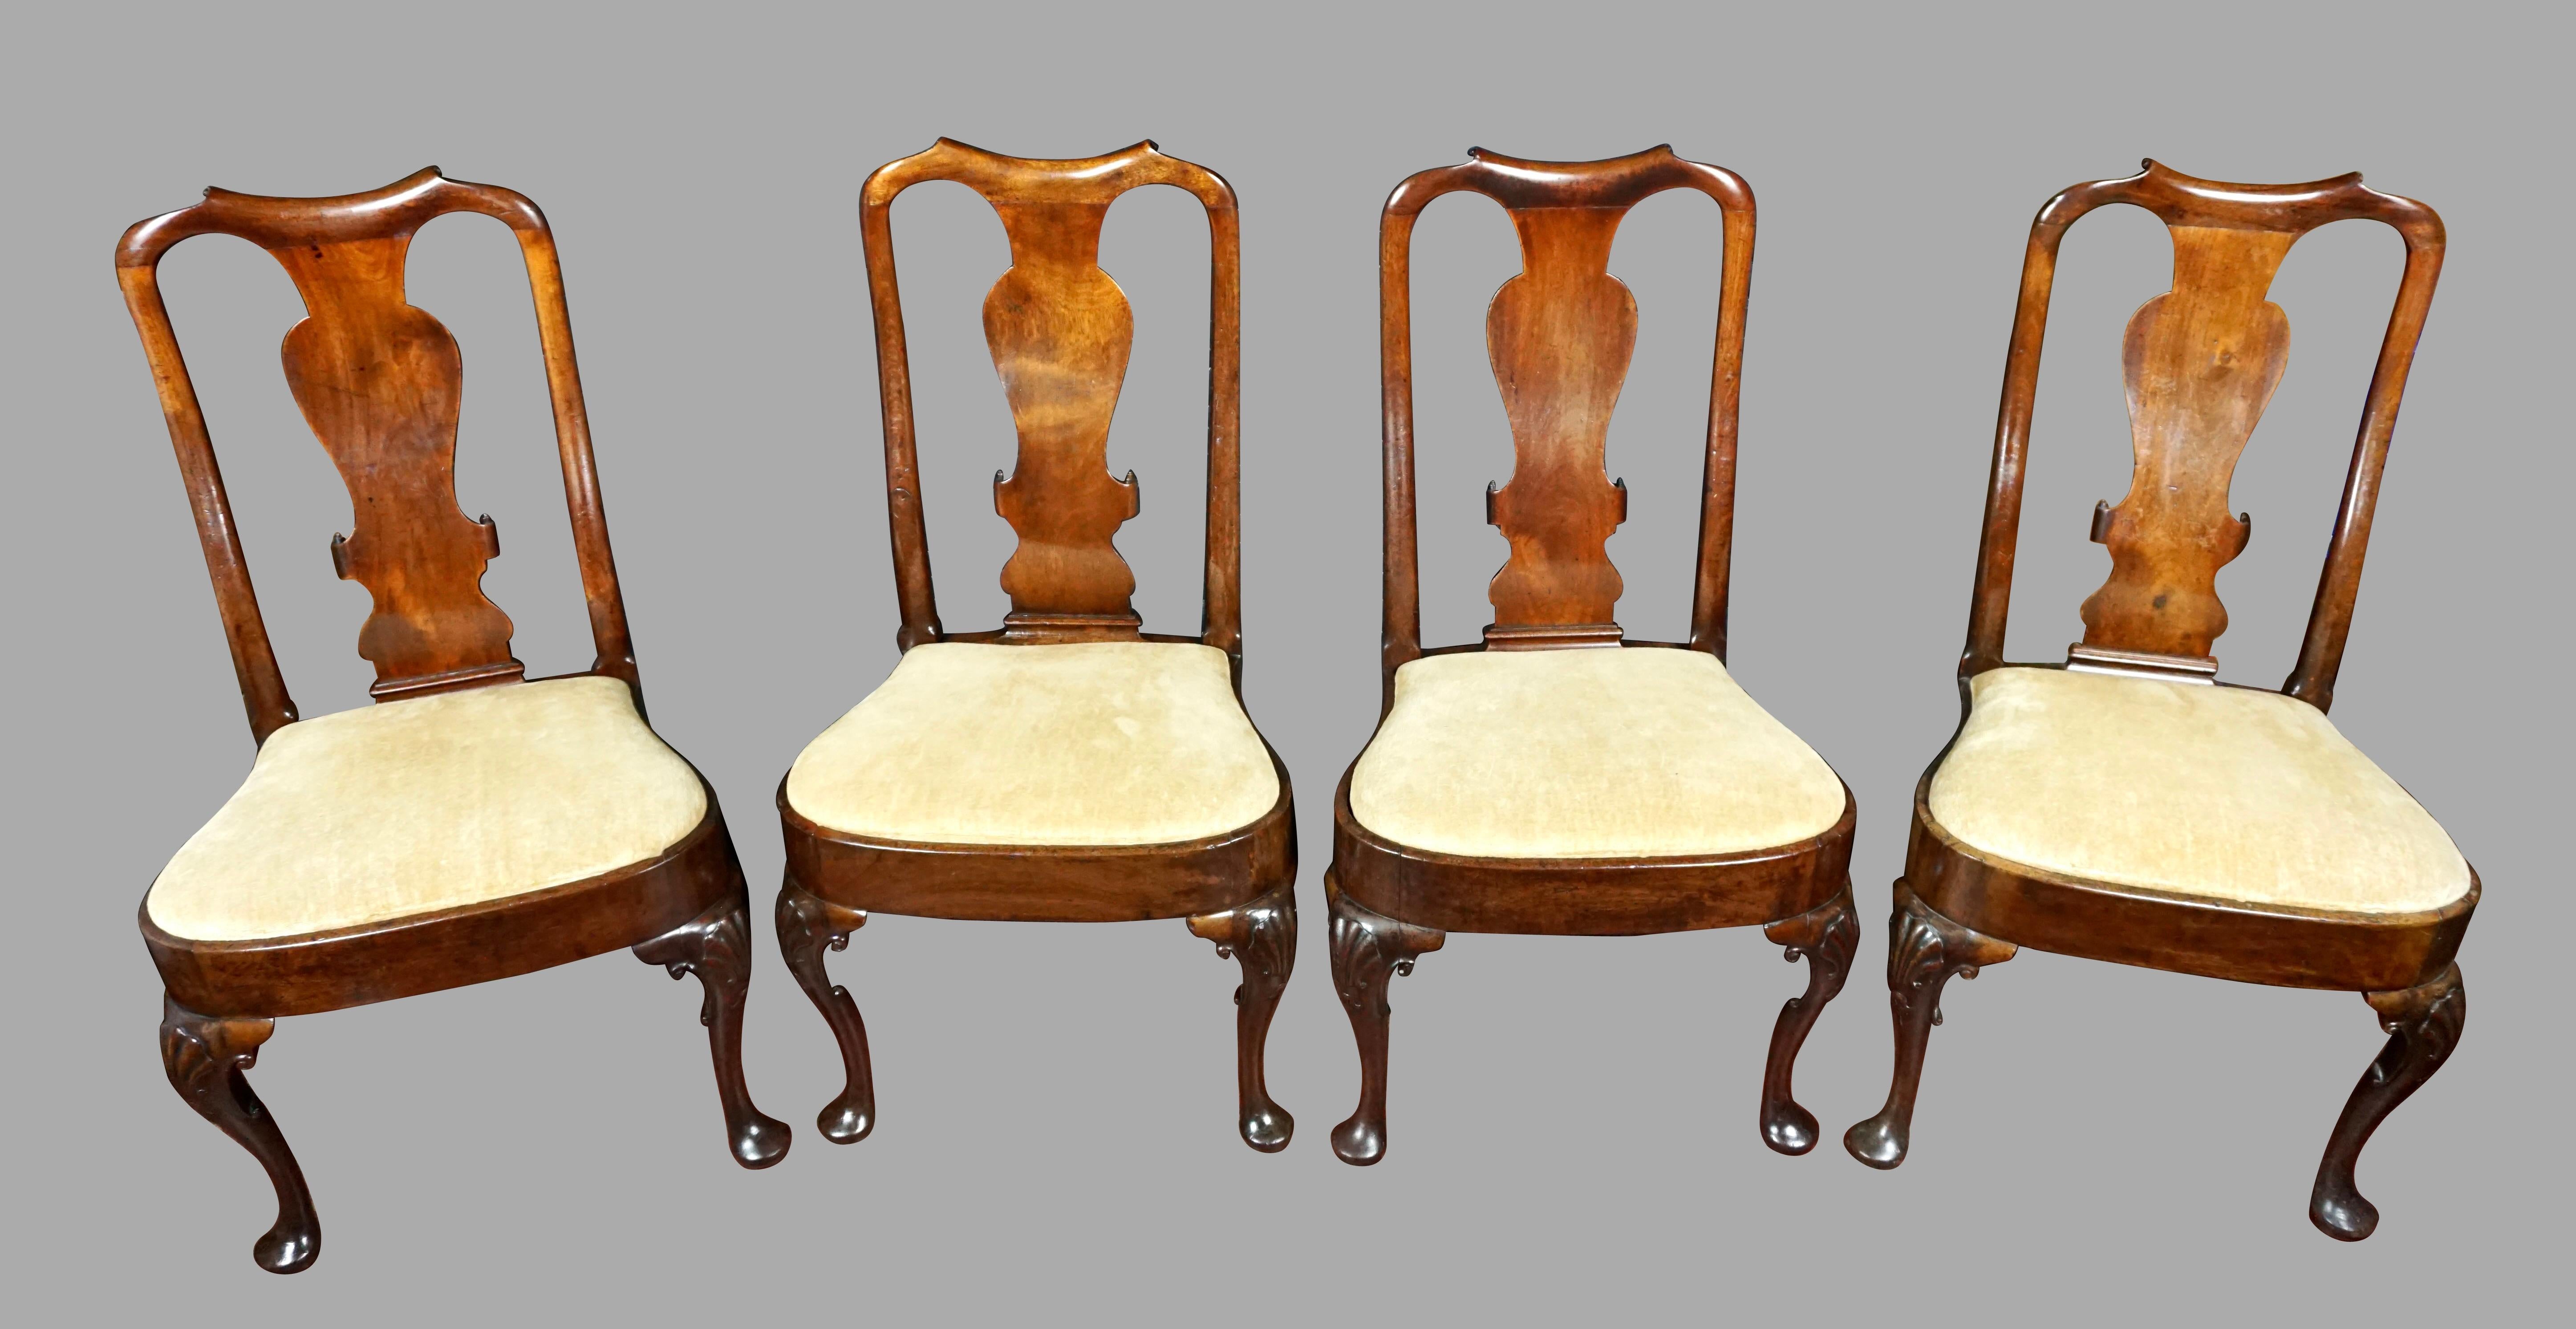 A set of 4 English George II period walnut side chairs of good scale, the undulating crestrail above a vasiform splat with carved volutes, terminating in a balloon seat with drop-in cushions. The cabriole legs are accented by well-carved shells at